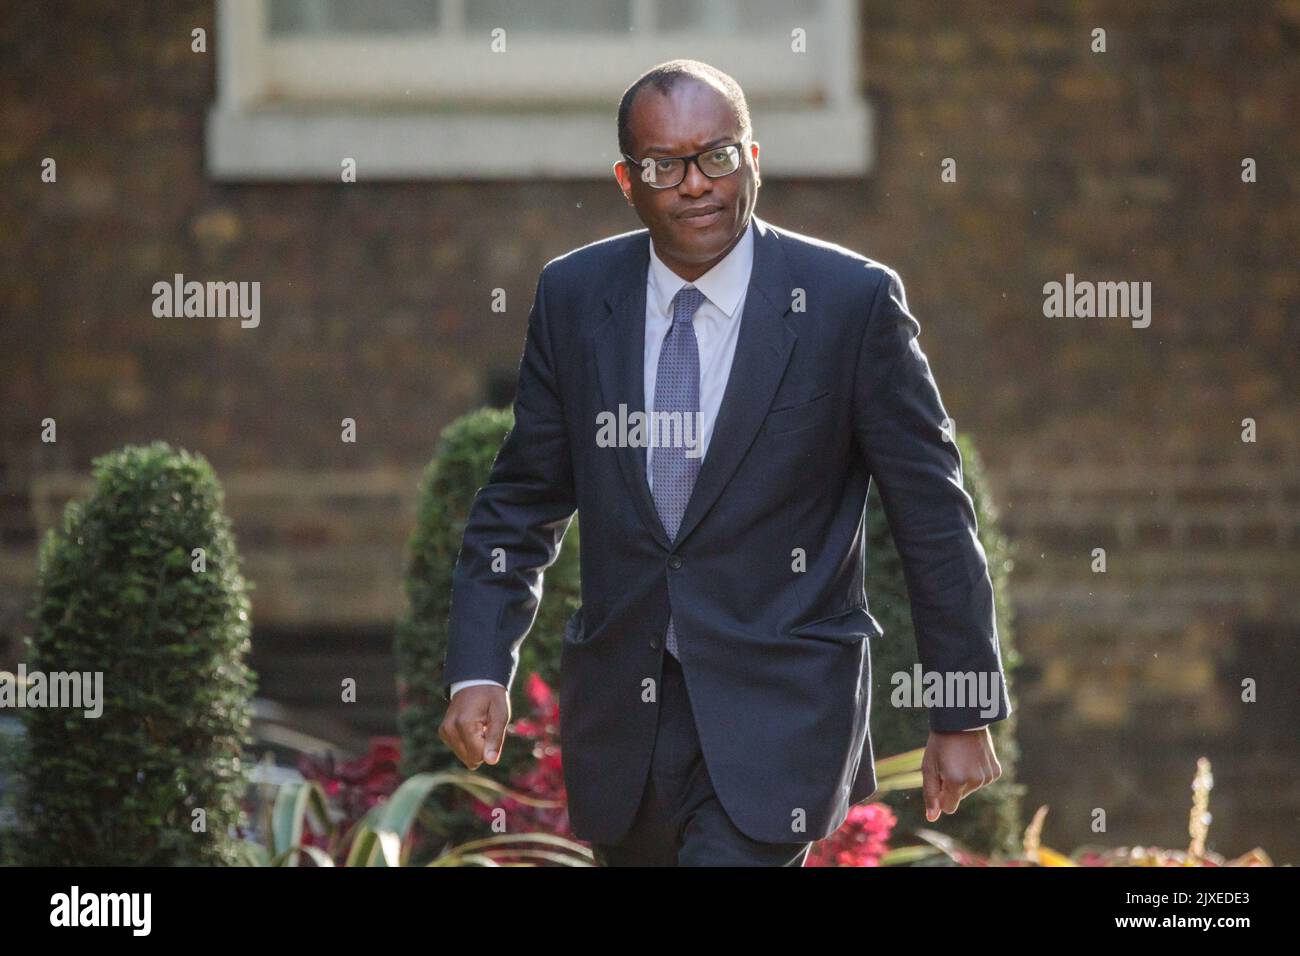 Downing Street, London, UK. 7th Sep, 2022. Ministers attend the first Cabinet Meeting at 10 Downing Street since Prime Minister Liz Truss appointed them last night. Kwasi Kwarteng MP, Chancellor of the Exchequer. Credit: amanda rose/Alamy Live News Stock Photo